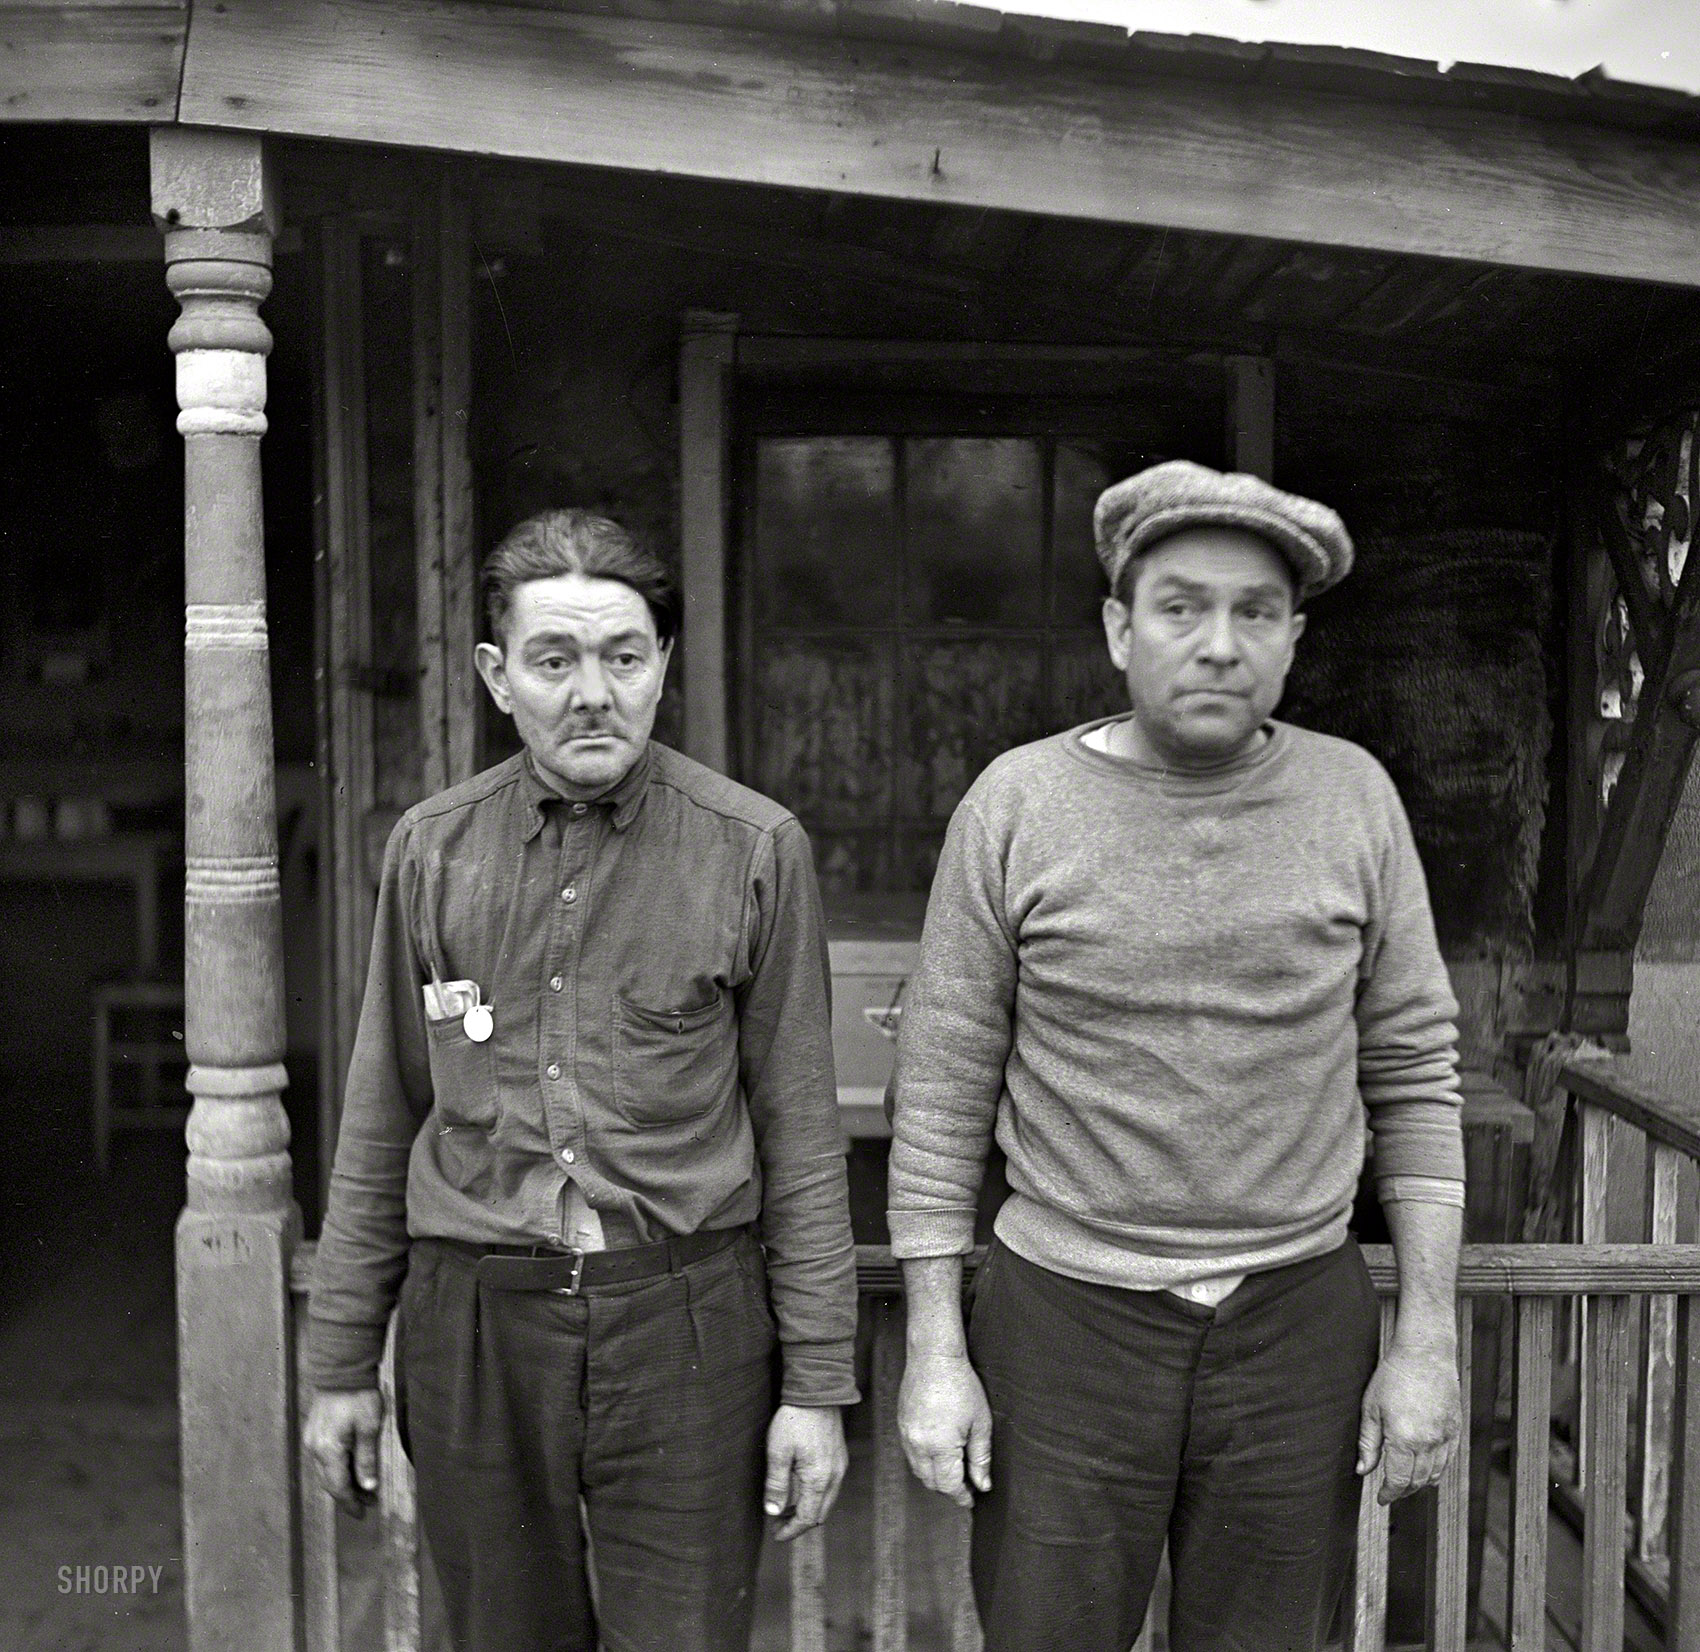 January 1937. Ottawa, Illinois. "Two types living along the waterfront." Photo by Russell Lee for the Resettlement Administration. View full size.